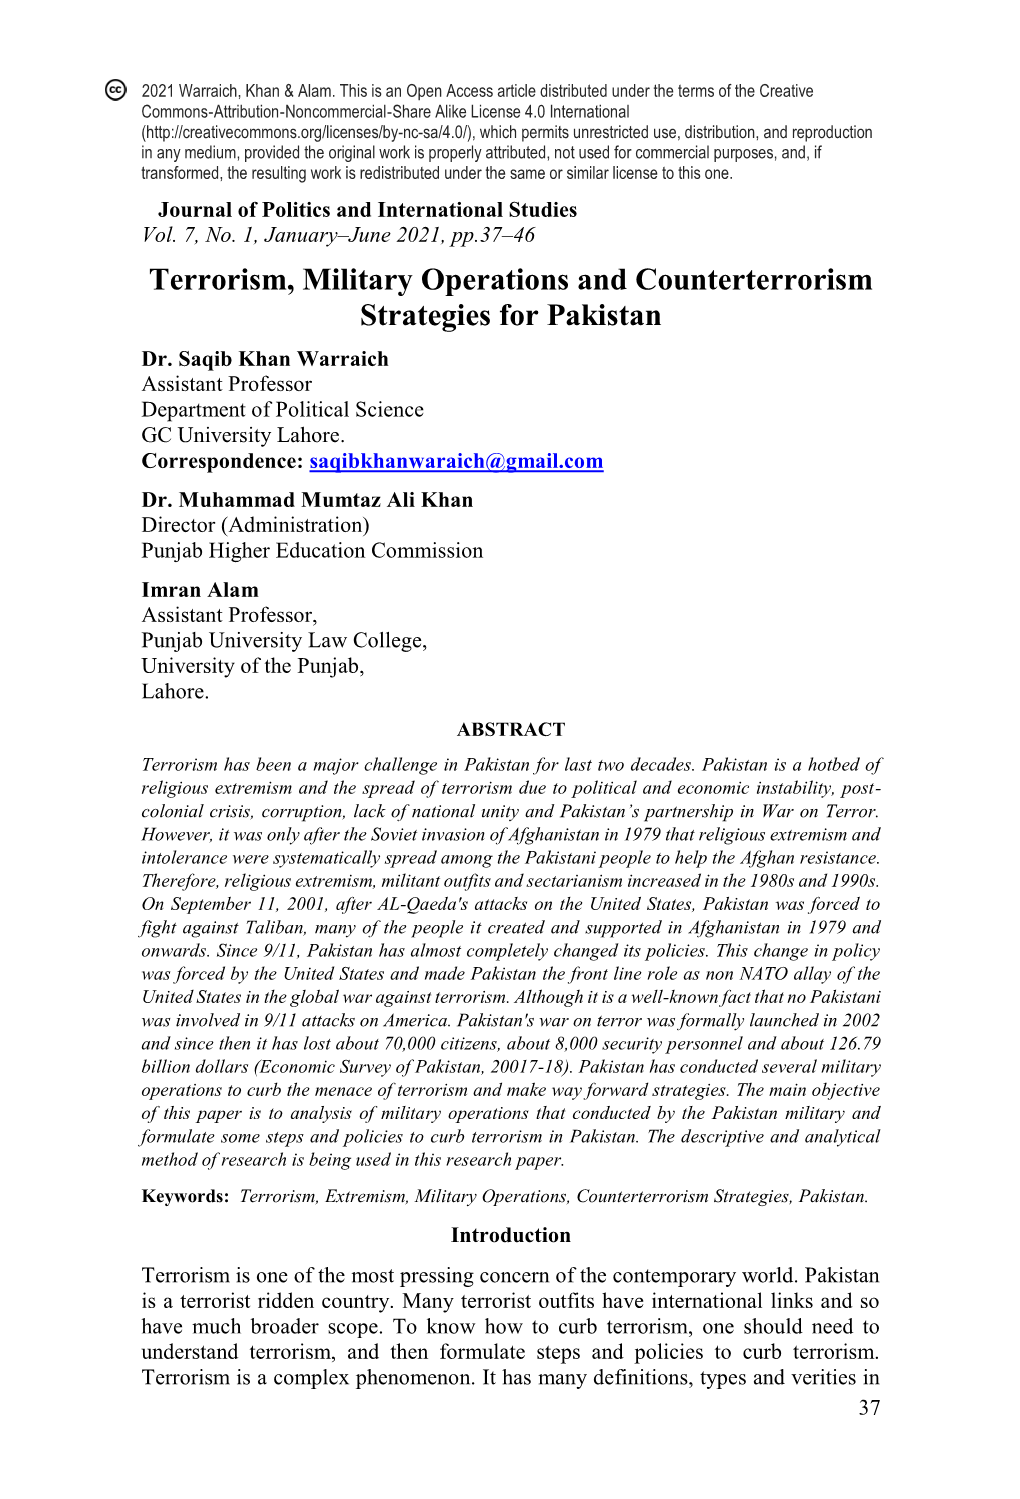 Terrorism, Military Operations and Counterterrorism Strategies for Pakistan Dr